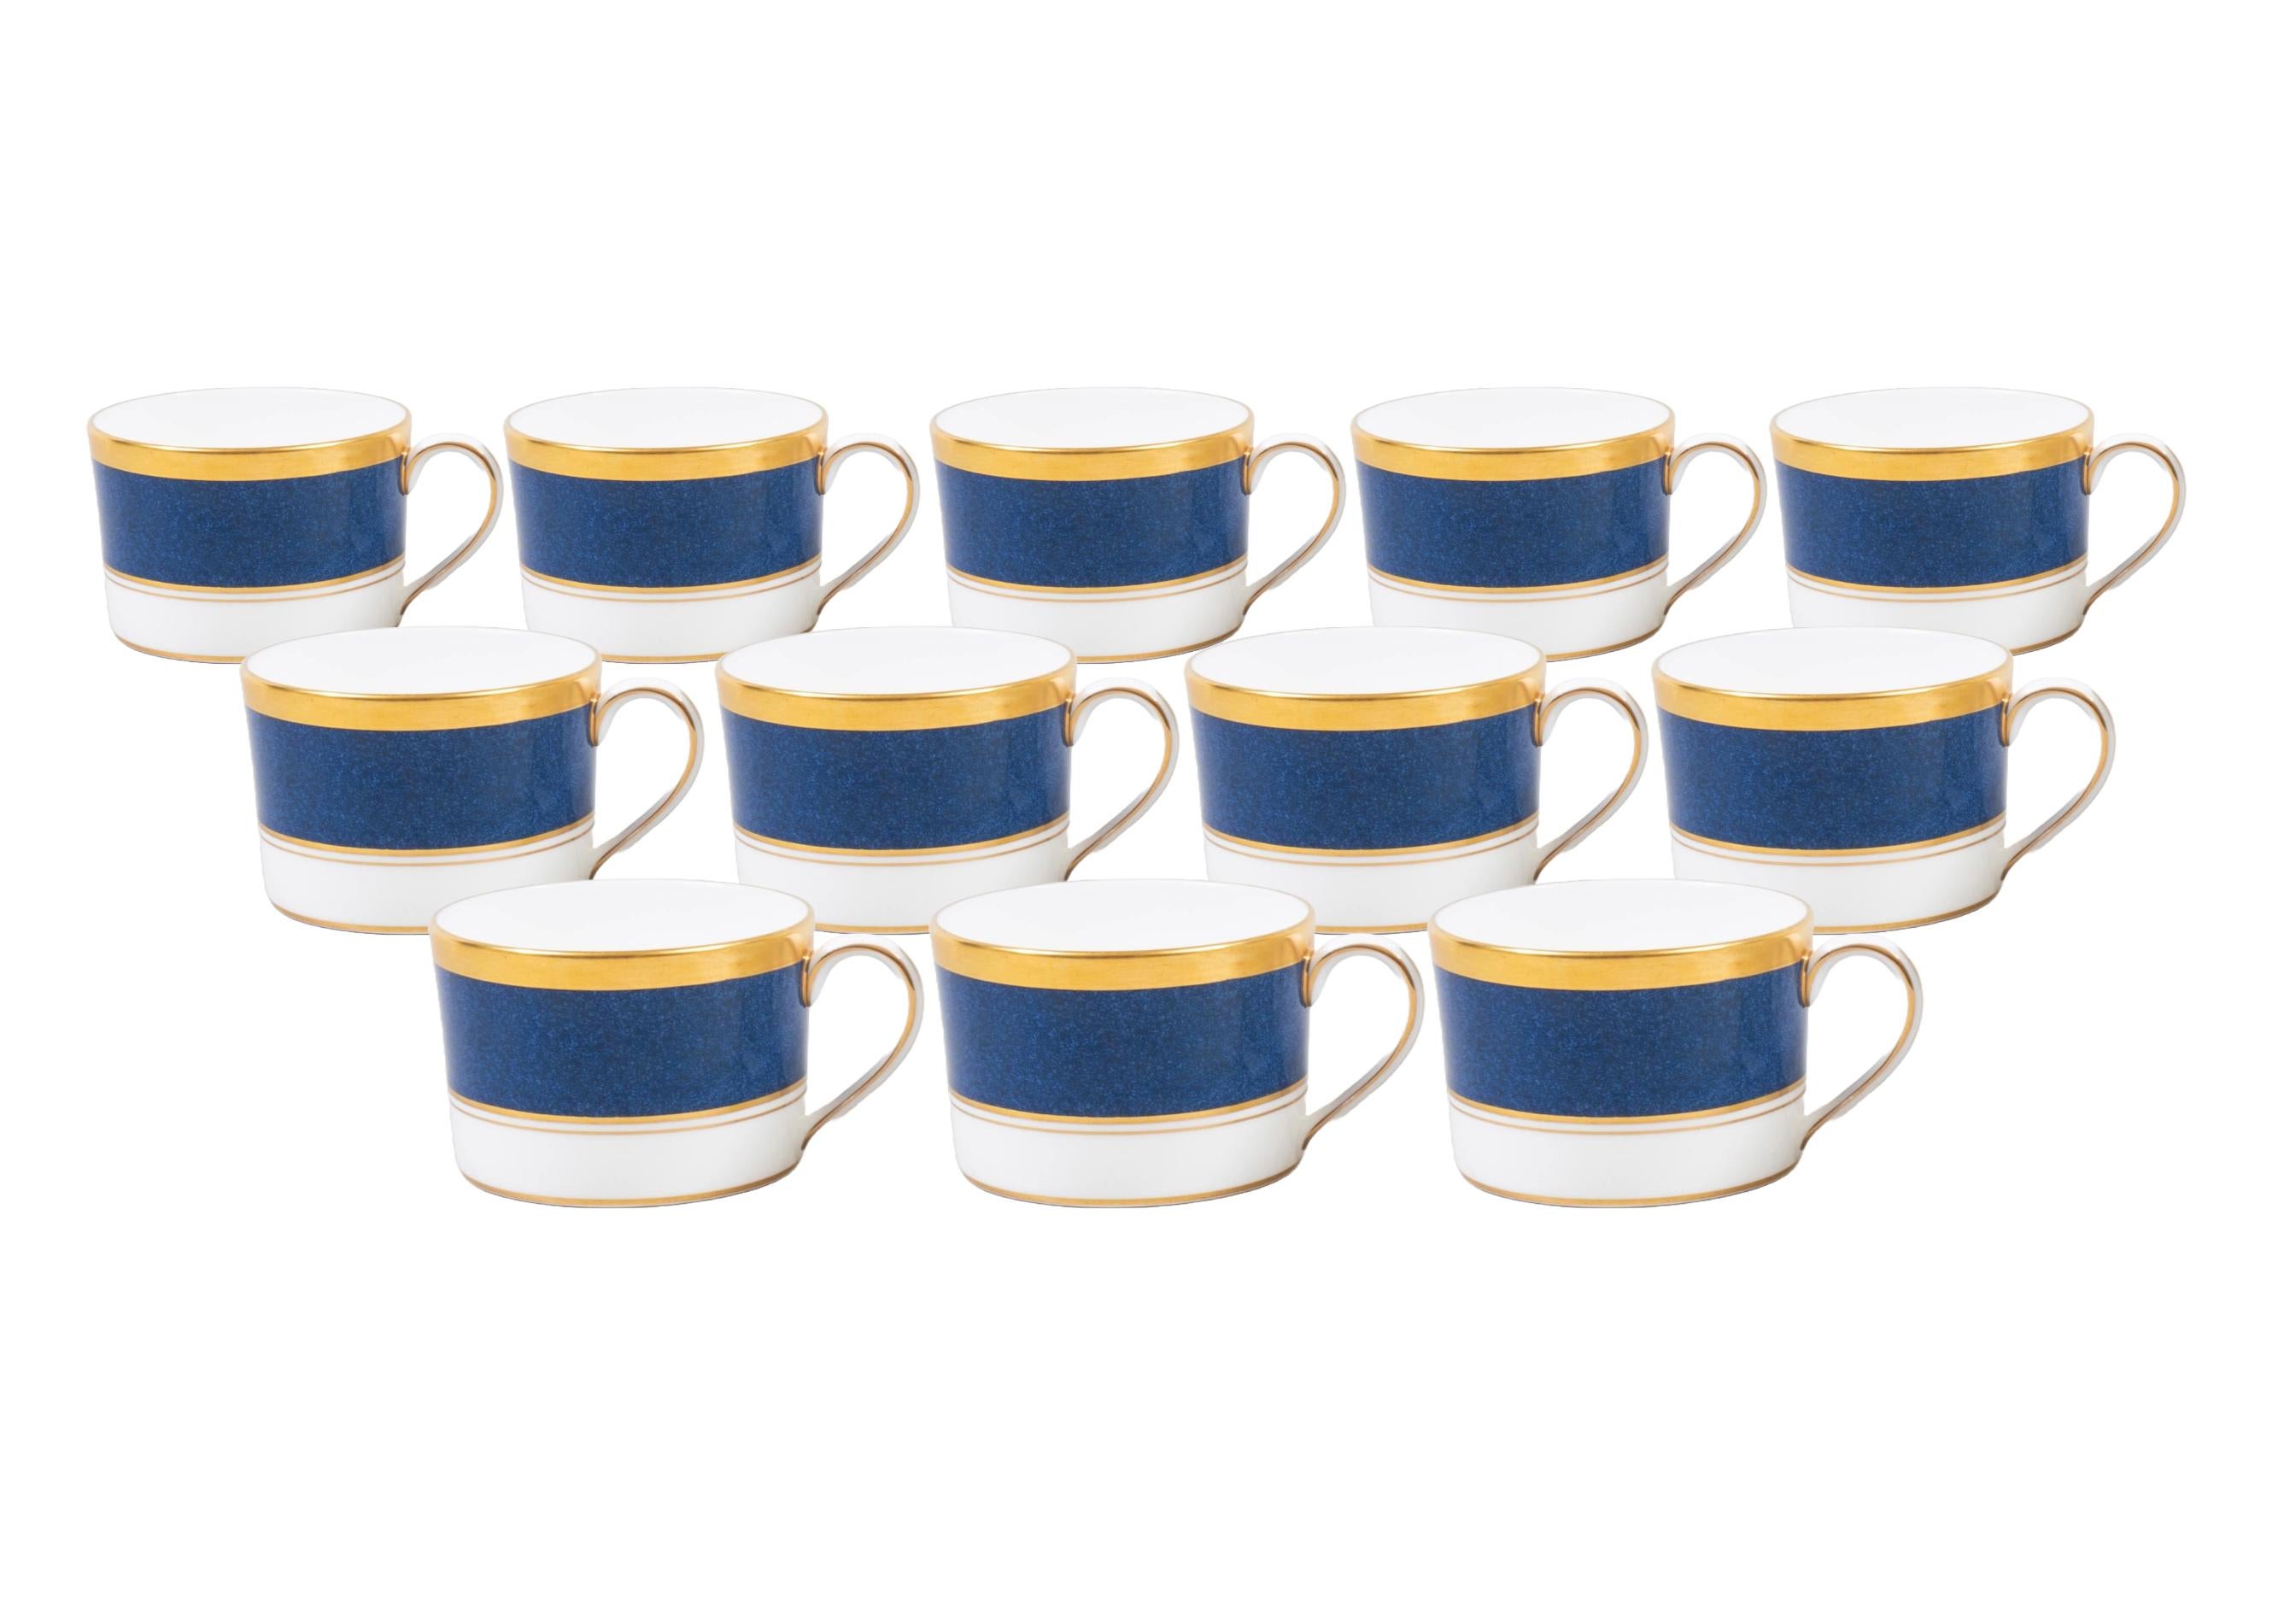 Complete English Porcelain Dinner Service For 12 People With Coffee/Tea Service In Good Condition For Sale In Tarry Town, NY